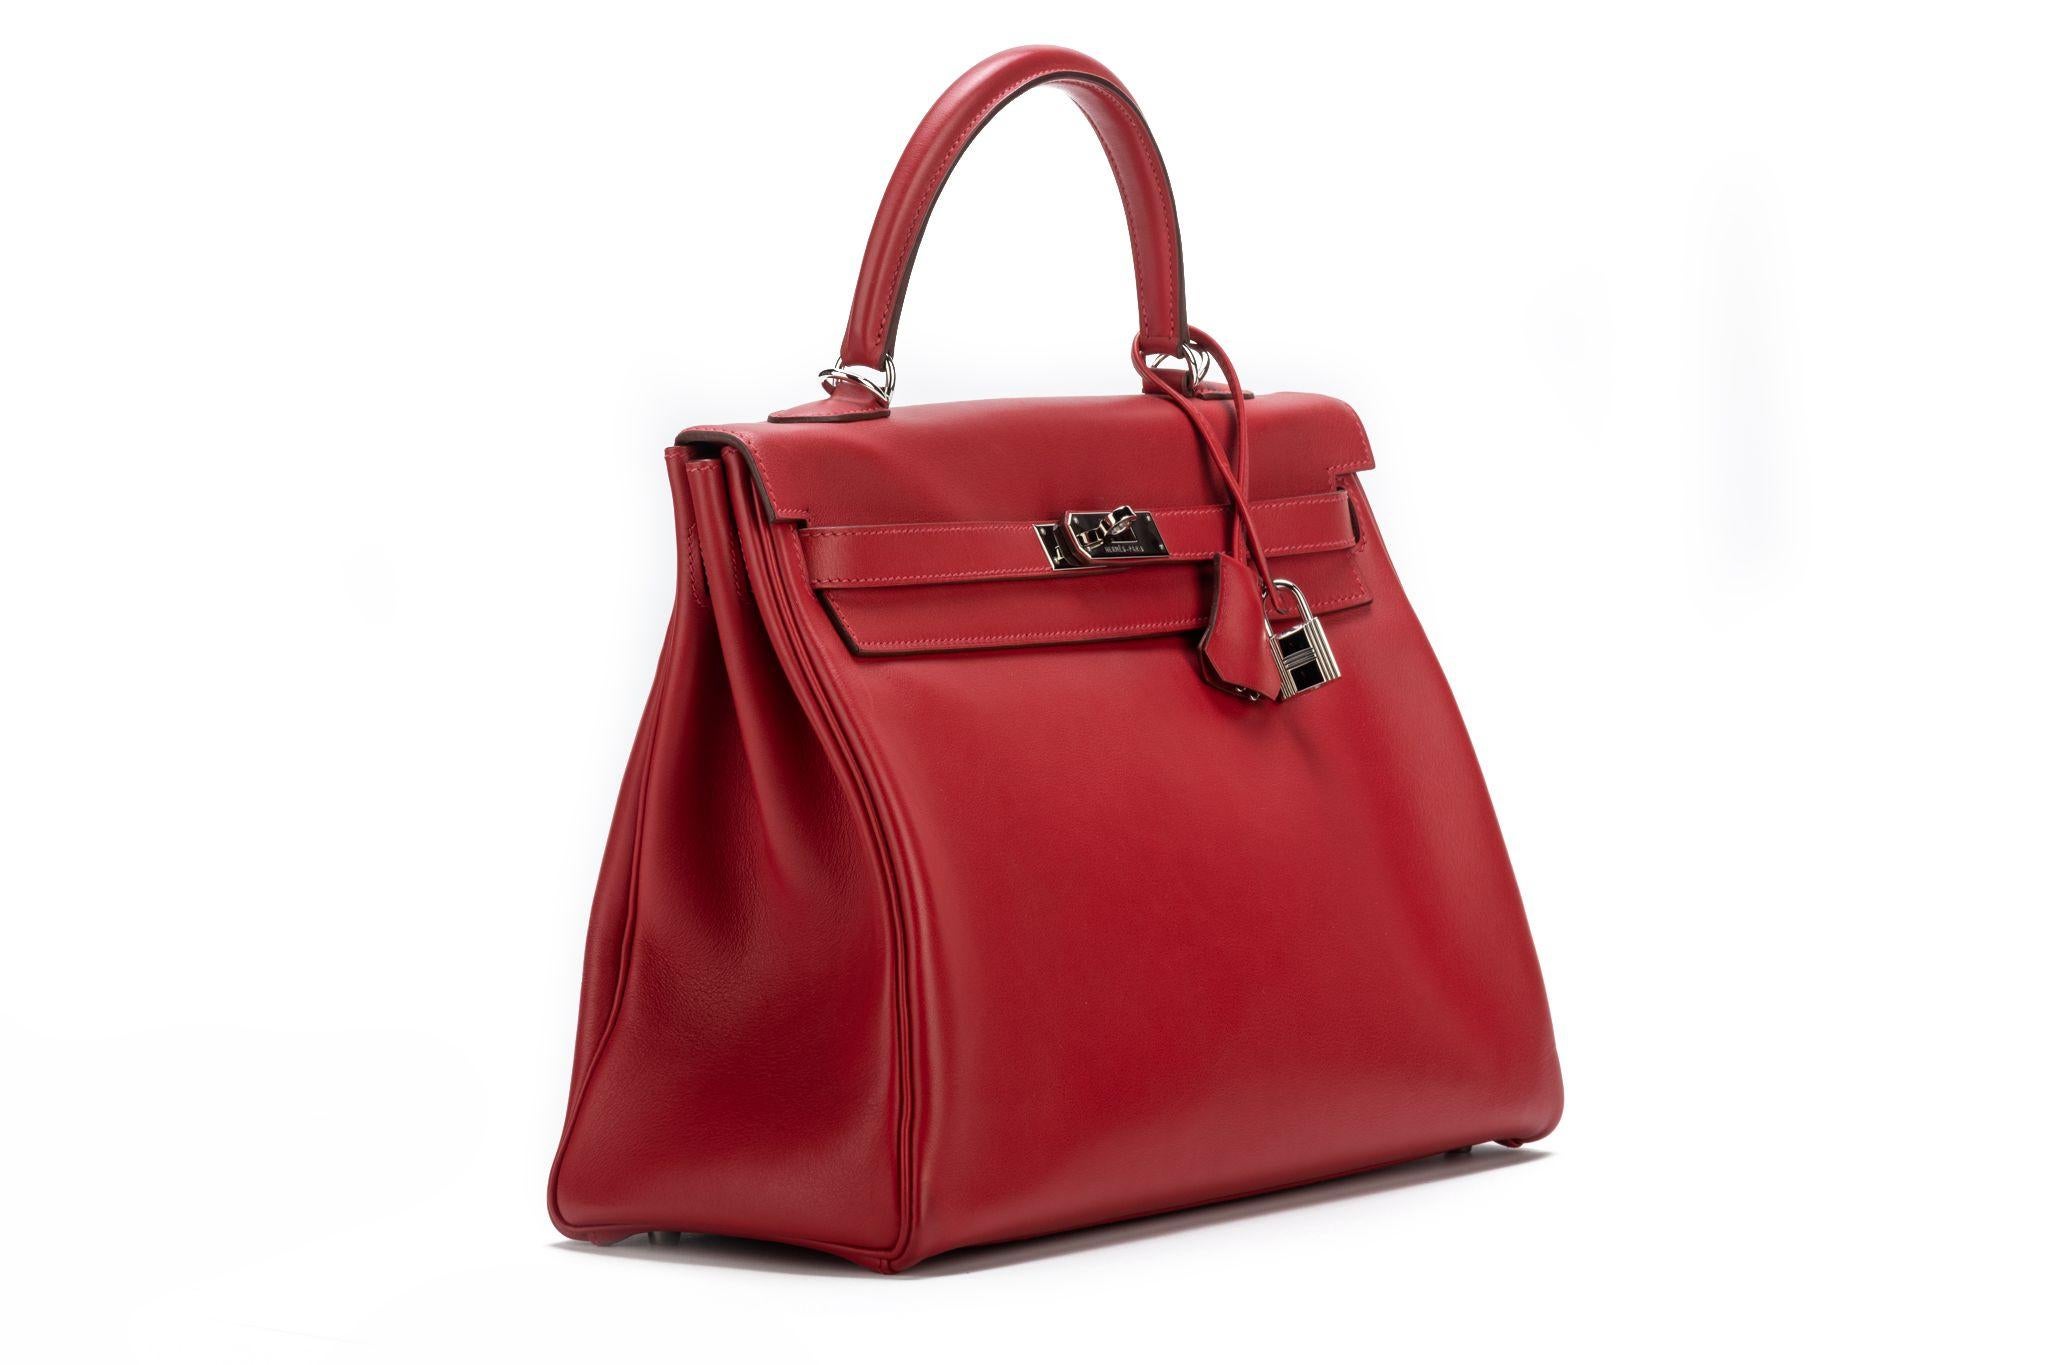 Hermes kelly 35cm retourne rouge casaque swift leather and palladium hardware in excellent condition. Handle drop 3.5